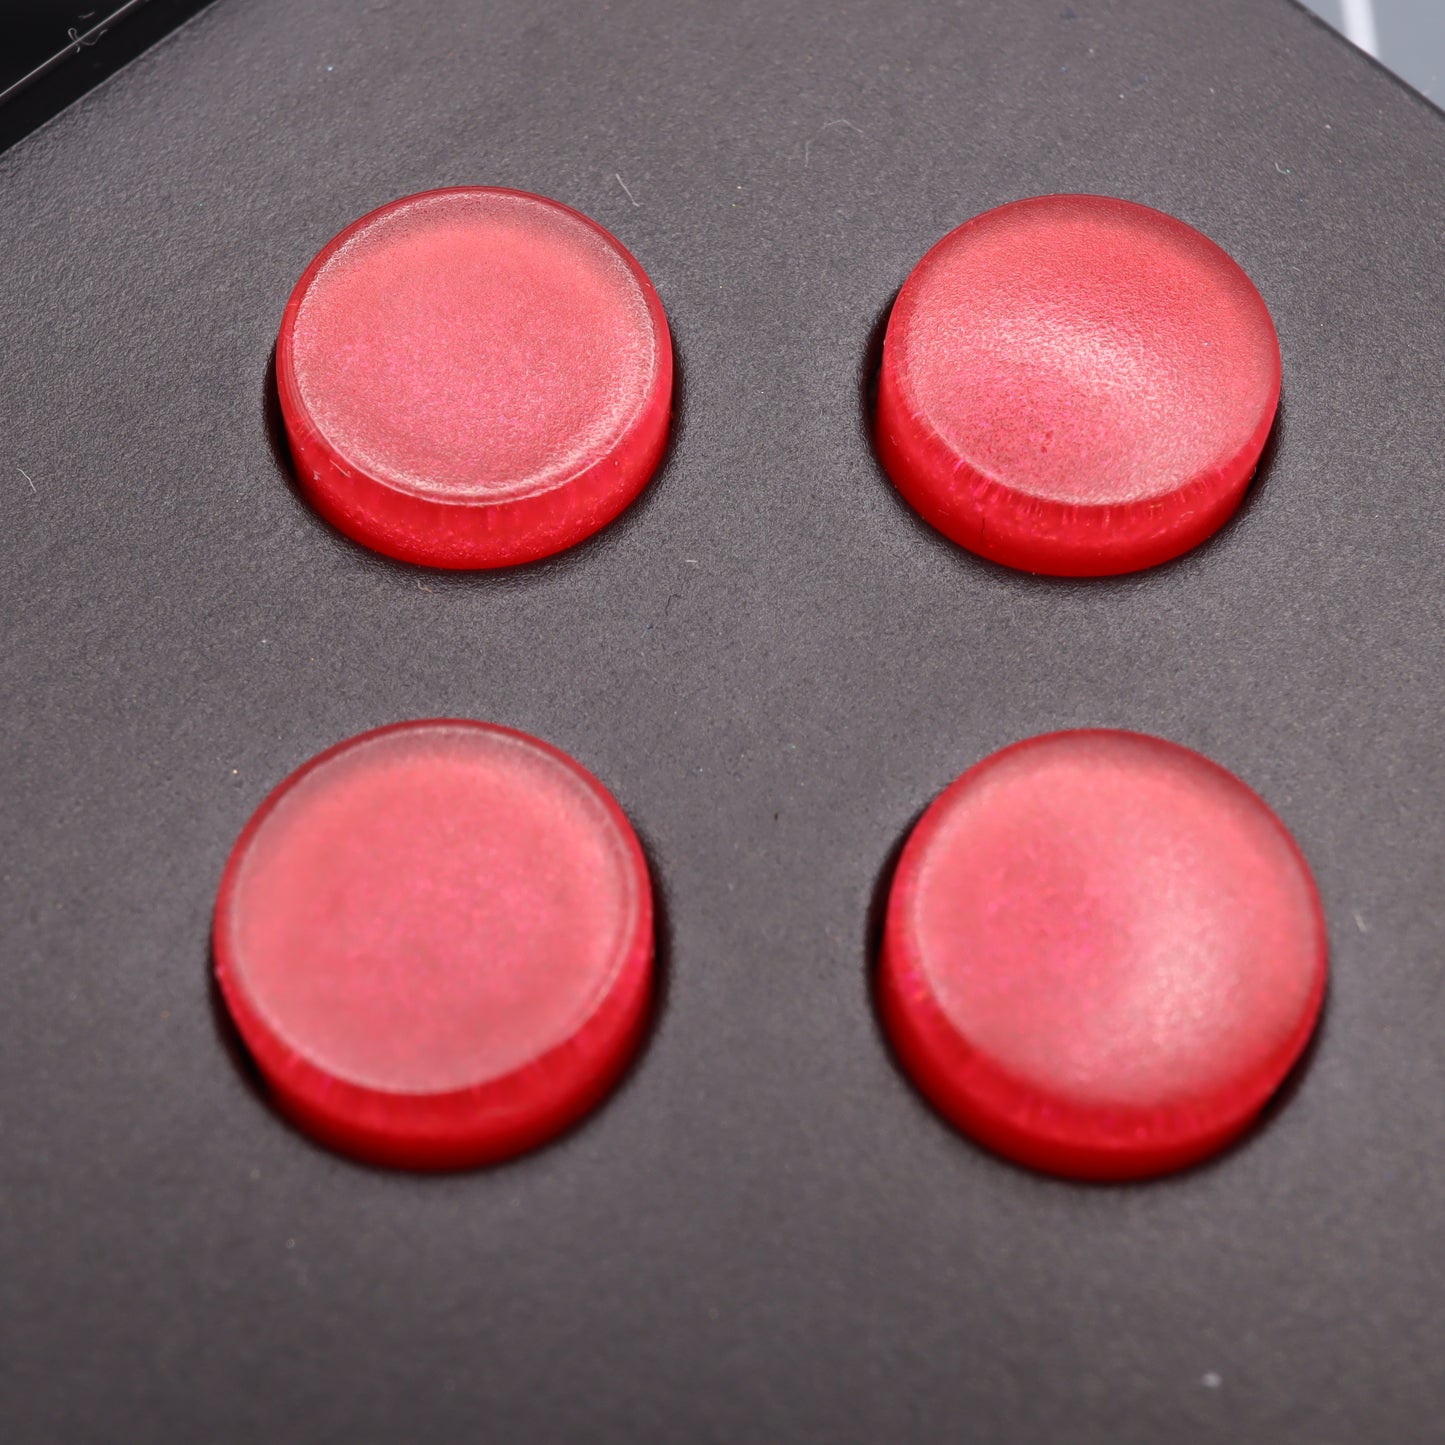 Lab Fifteen co custom resin Strawberry Candy action button set inside black Analogue Pocket